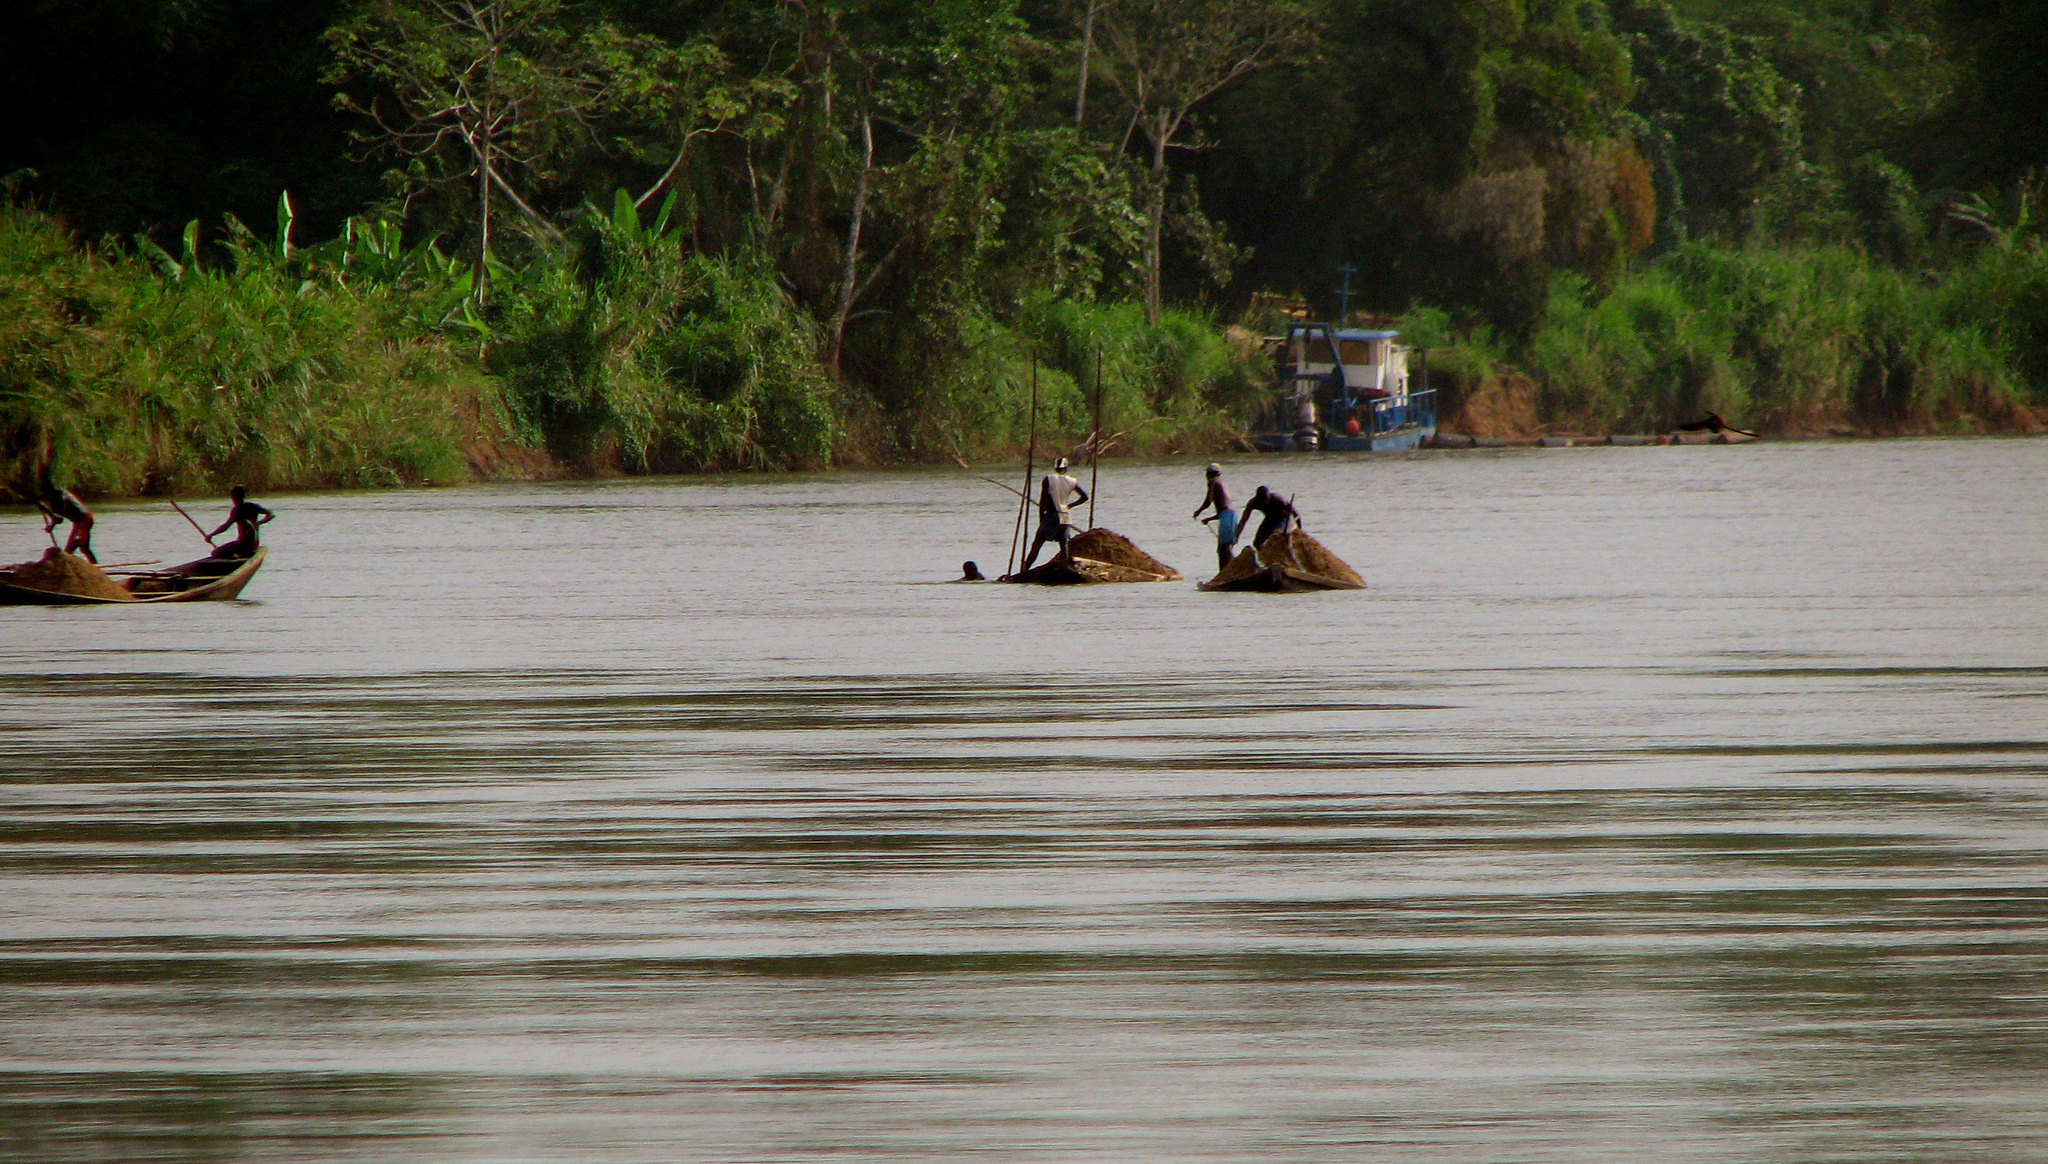 Cameroon Fishing Boats. Photo credit: Jake Stimpson, Flickr 2006, CC-BY2.0.